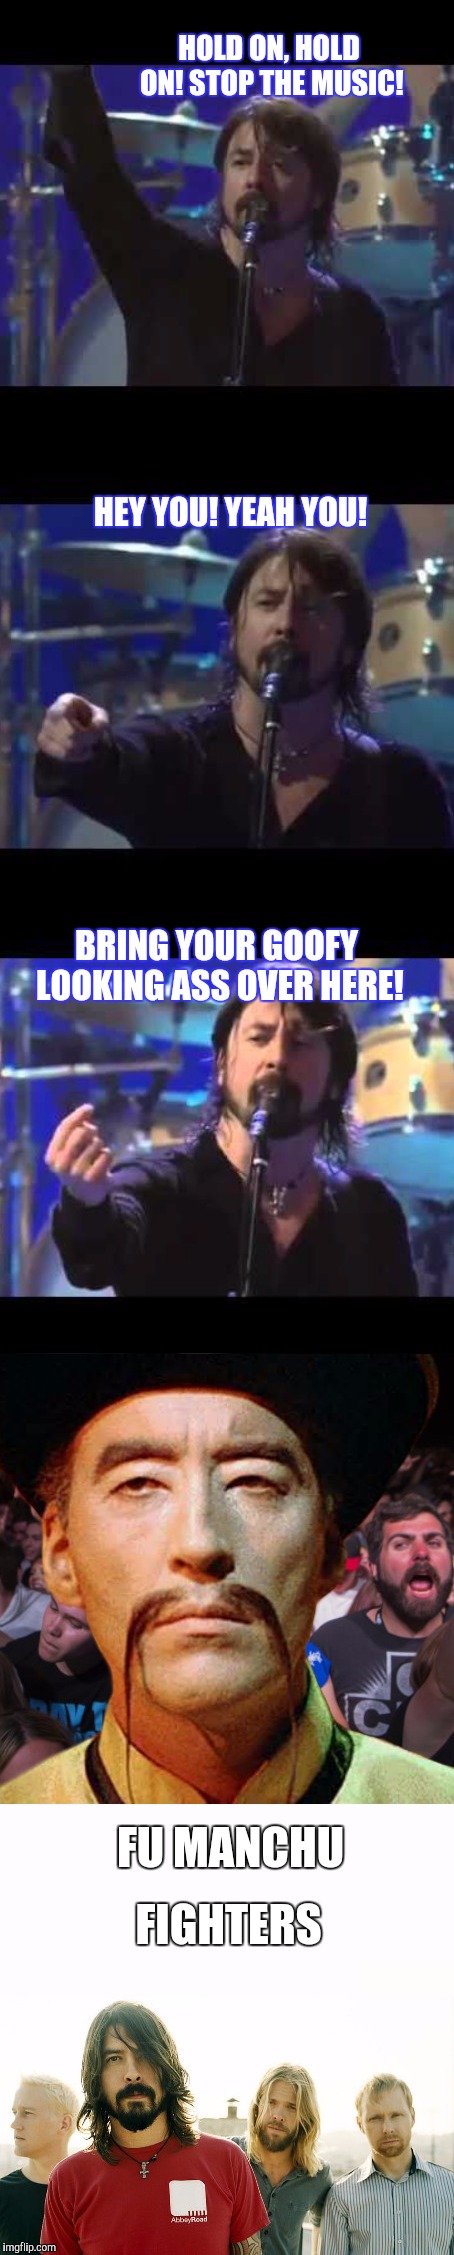 Hope this doesn't take Everlong. | HOLD ON, HOLD ON! STOP THE MUSIC! HEY YOU! YEAH YOU! BRING YOUR GOOFY LOOKING ASS OVER HERE! FU MANCHU; FIGHTERS | image tagged in foo fighters,funny,chinese,old school | made w/ Imgflip meme maker